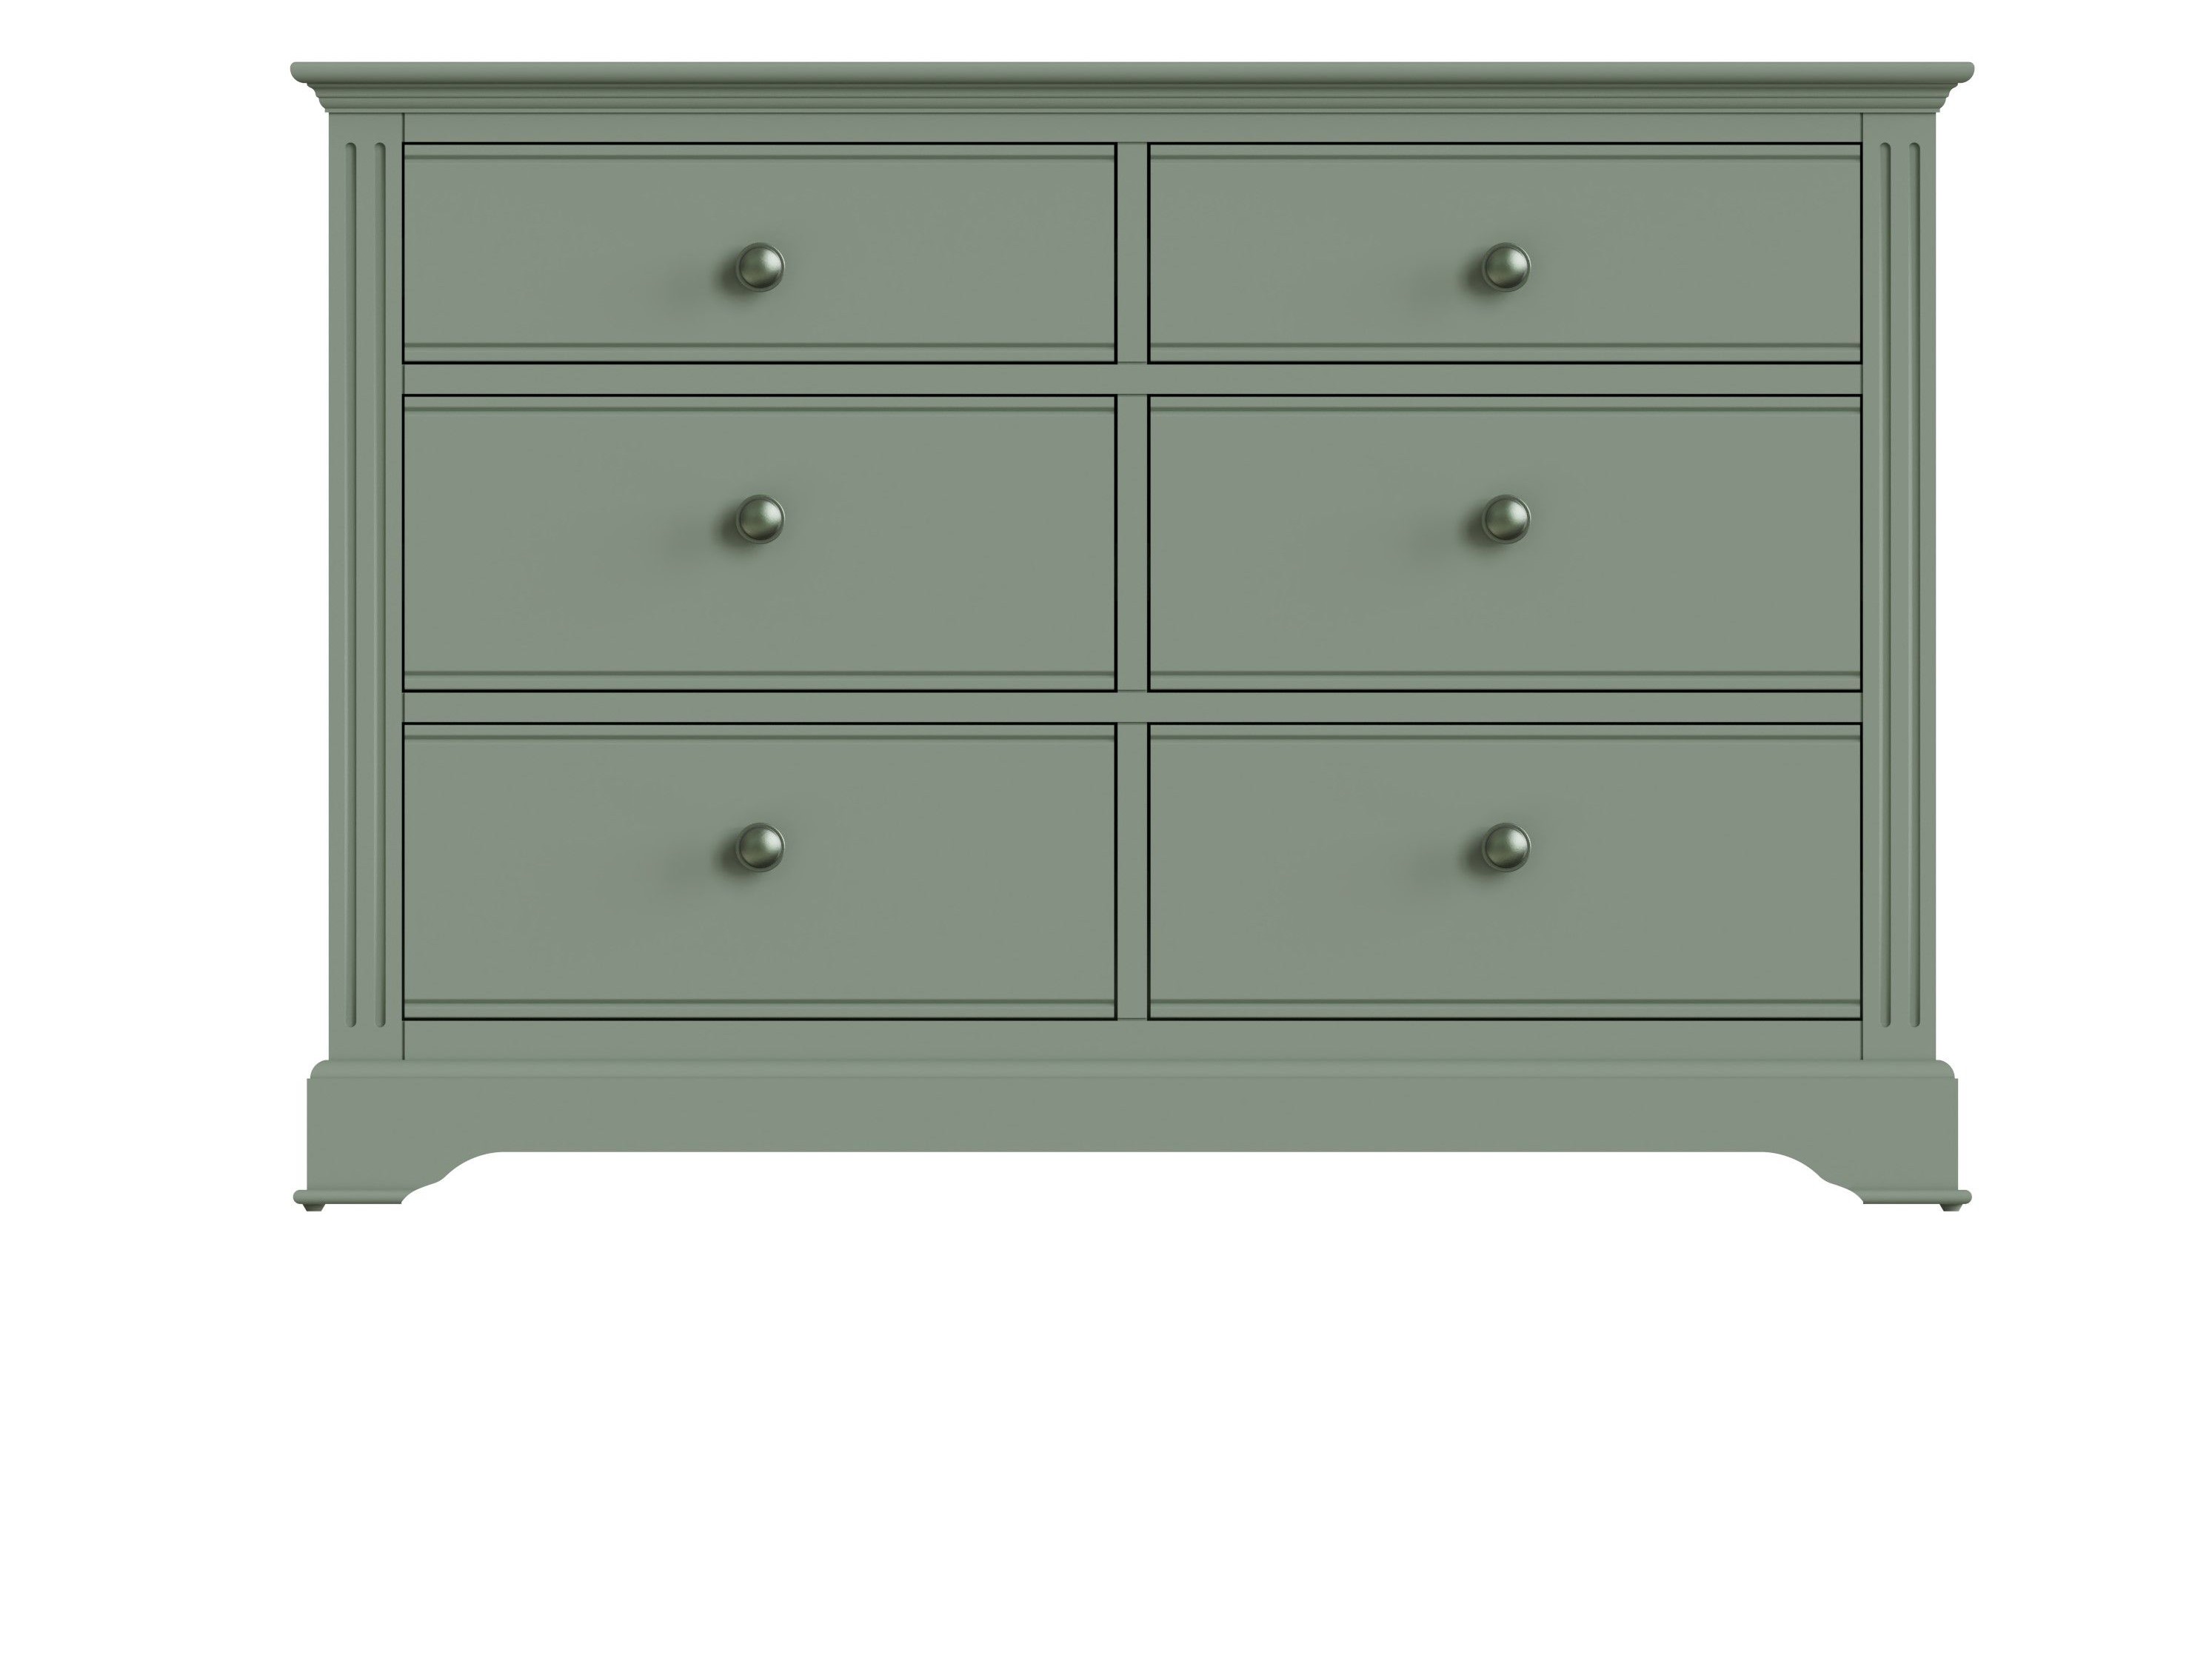 BP Cactus Green chest of 6 drawers